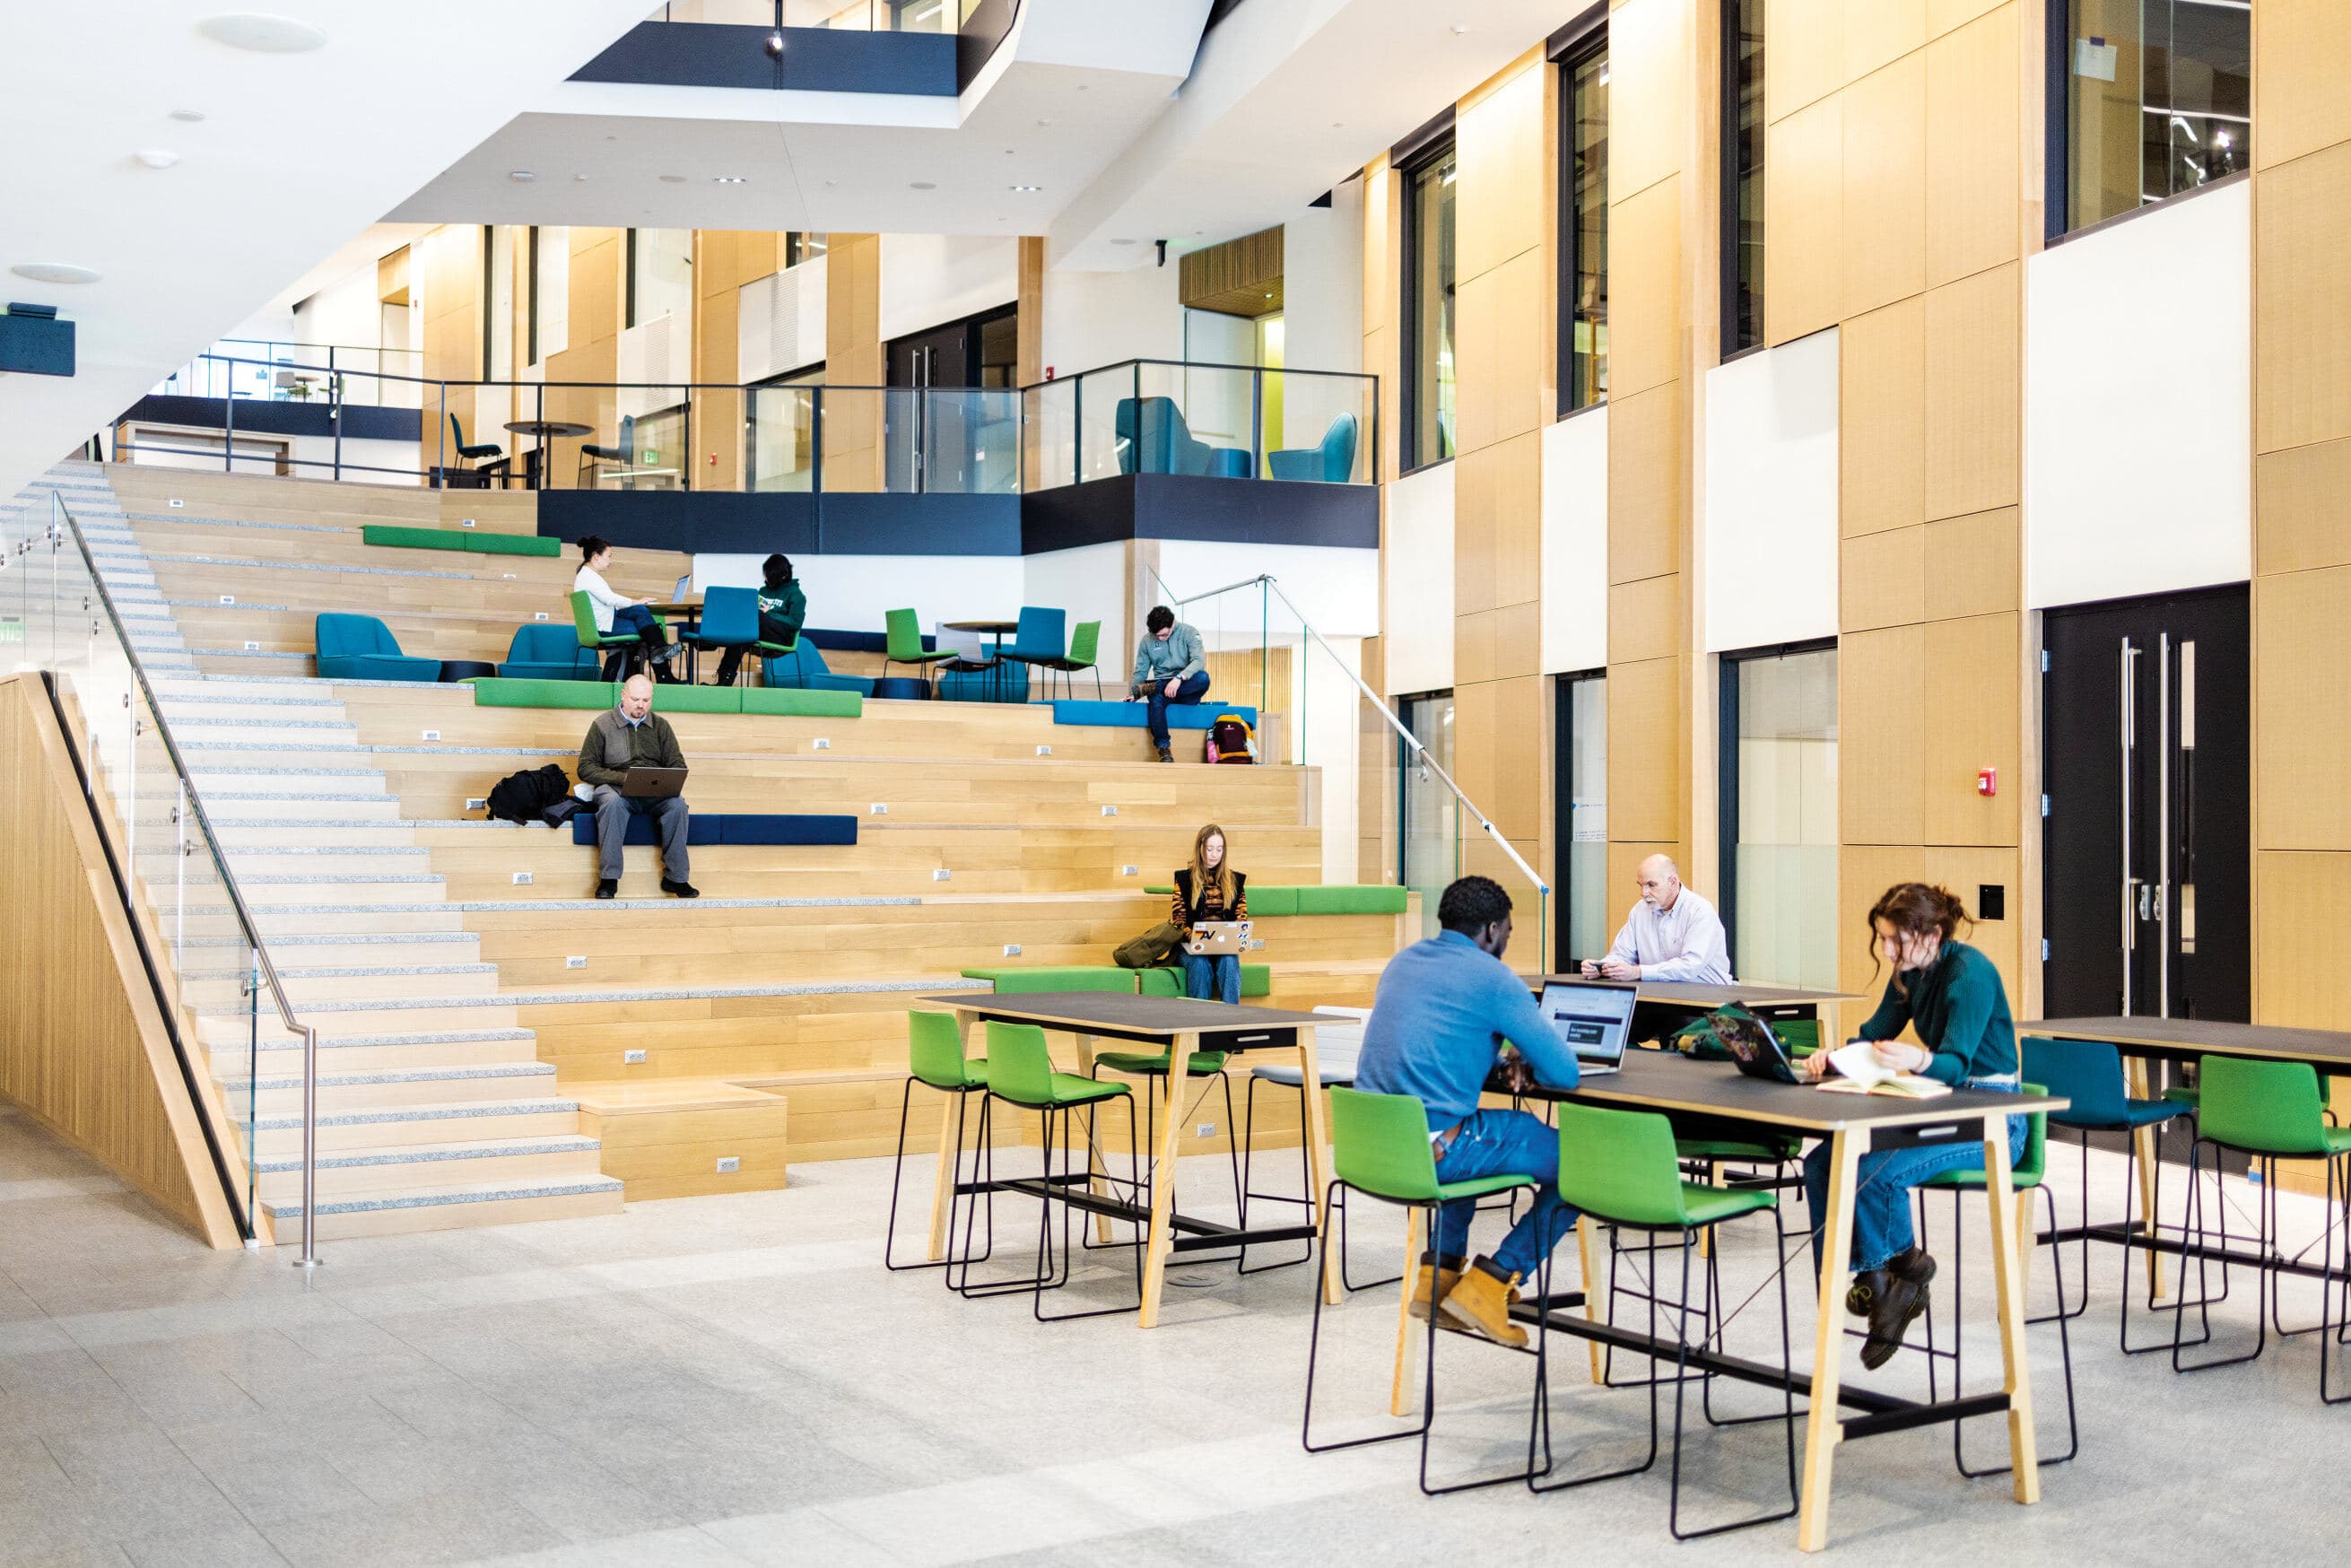 ECSC atrium with students sitting at tables